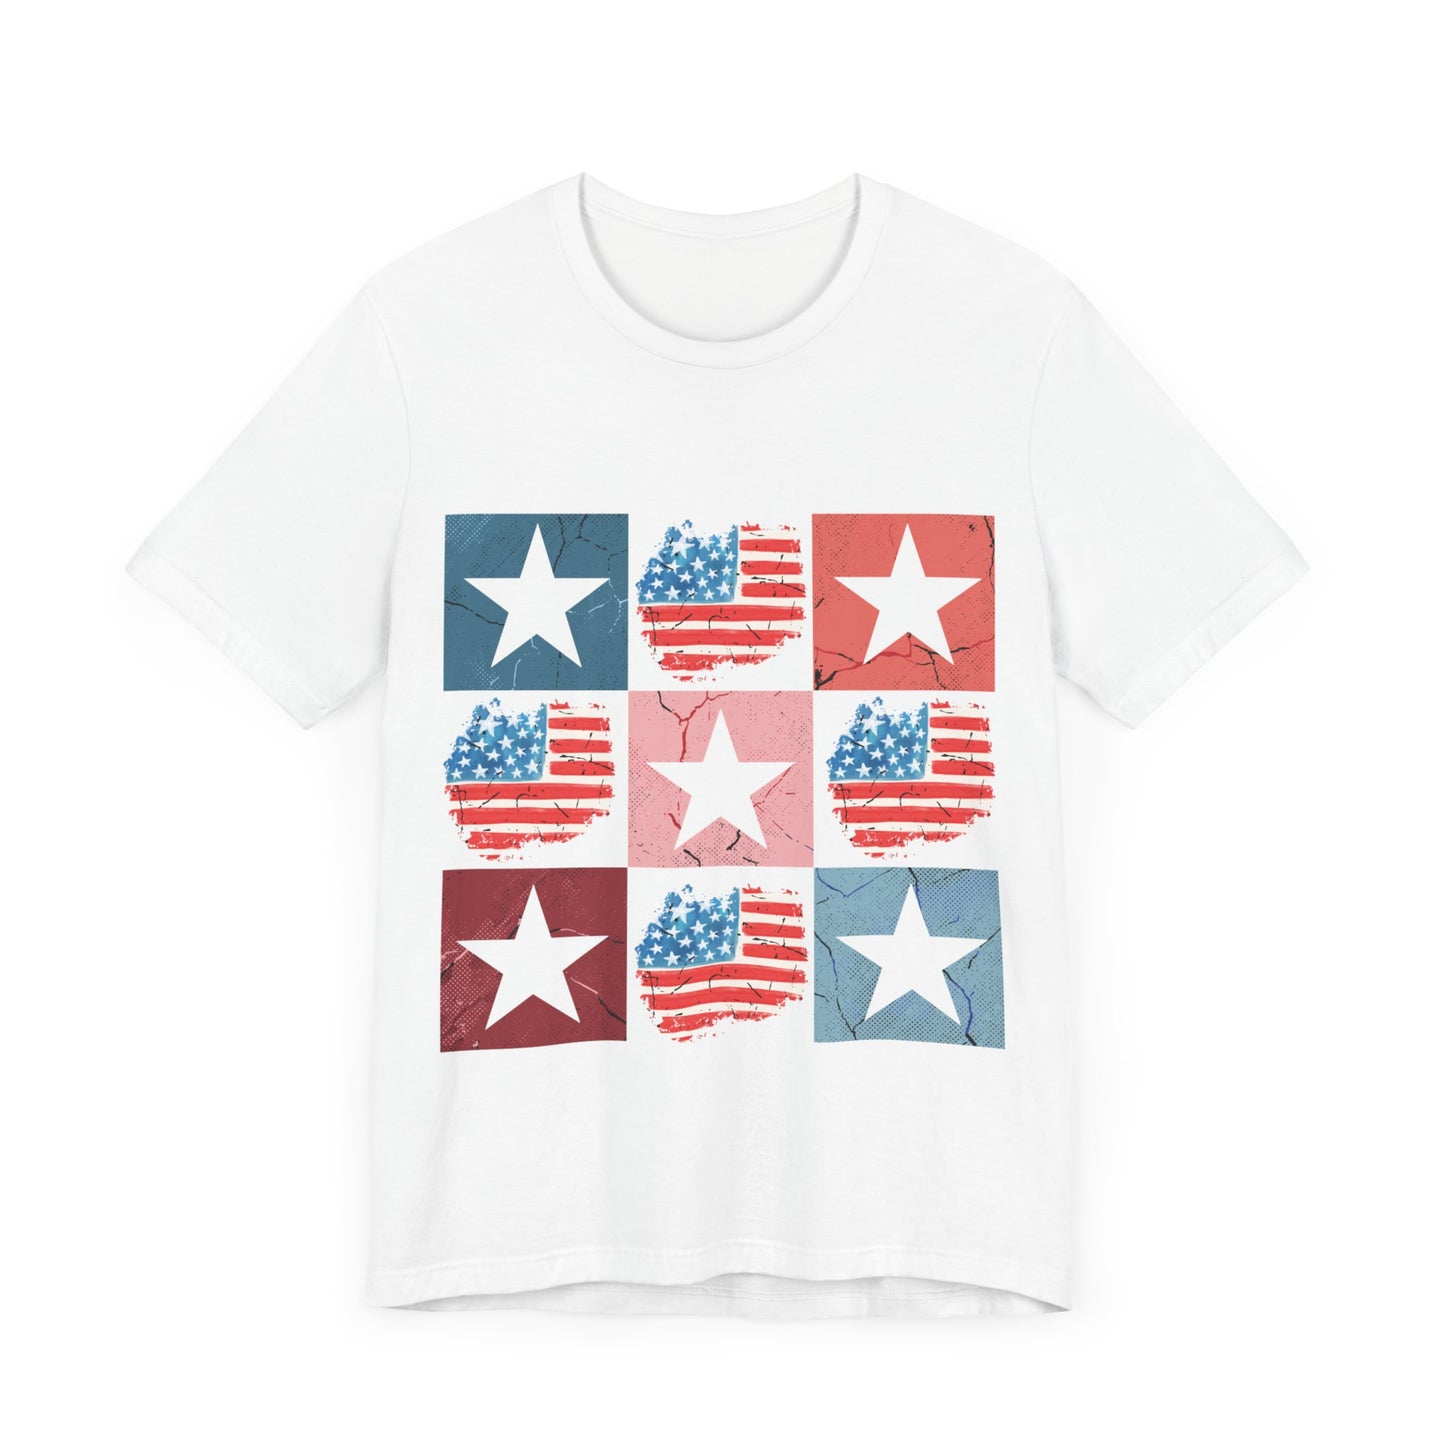 4th of July Coquette American Pride Women's Shirt - Patriotic Tee for Independence Day